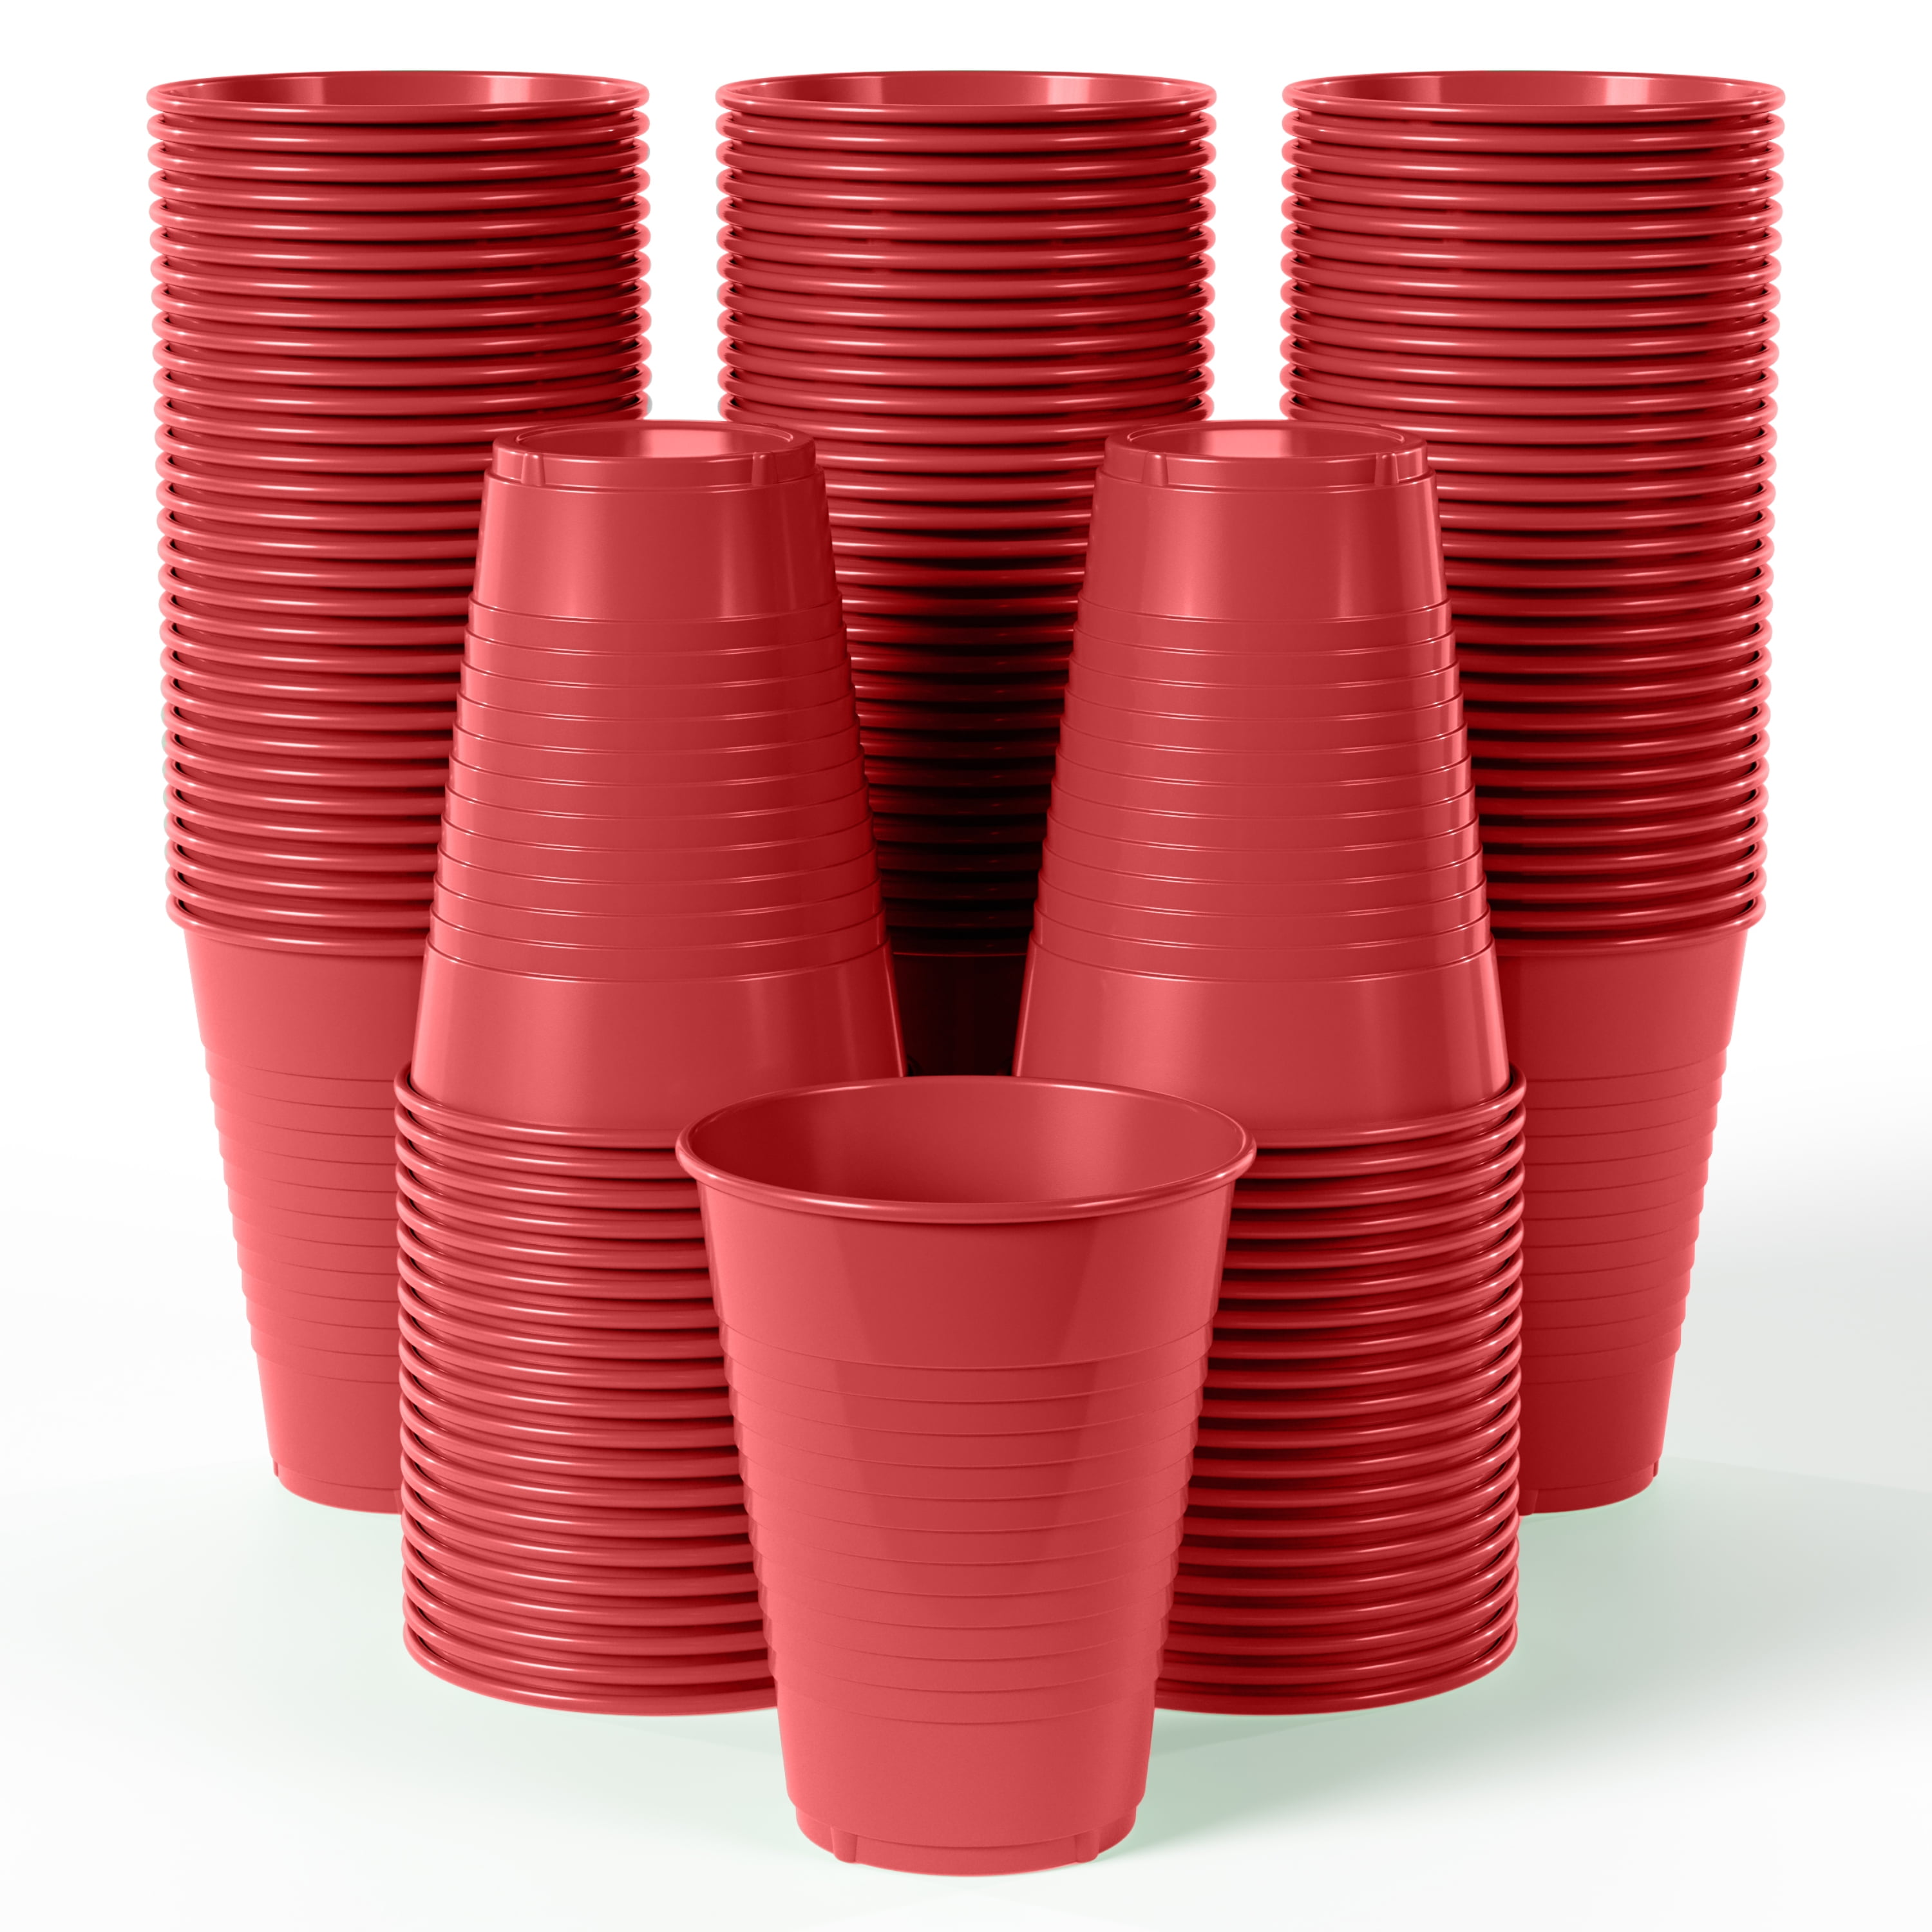 Kitcheniva Heavy-Duty Plastic Cups 12 oz - 100 Count, 100 count - Fred Meyer